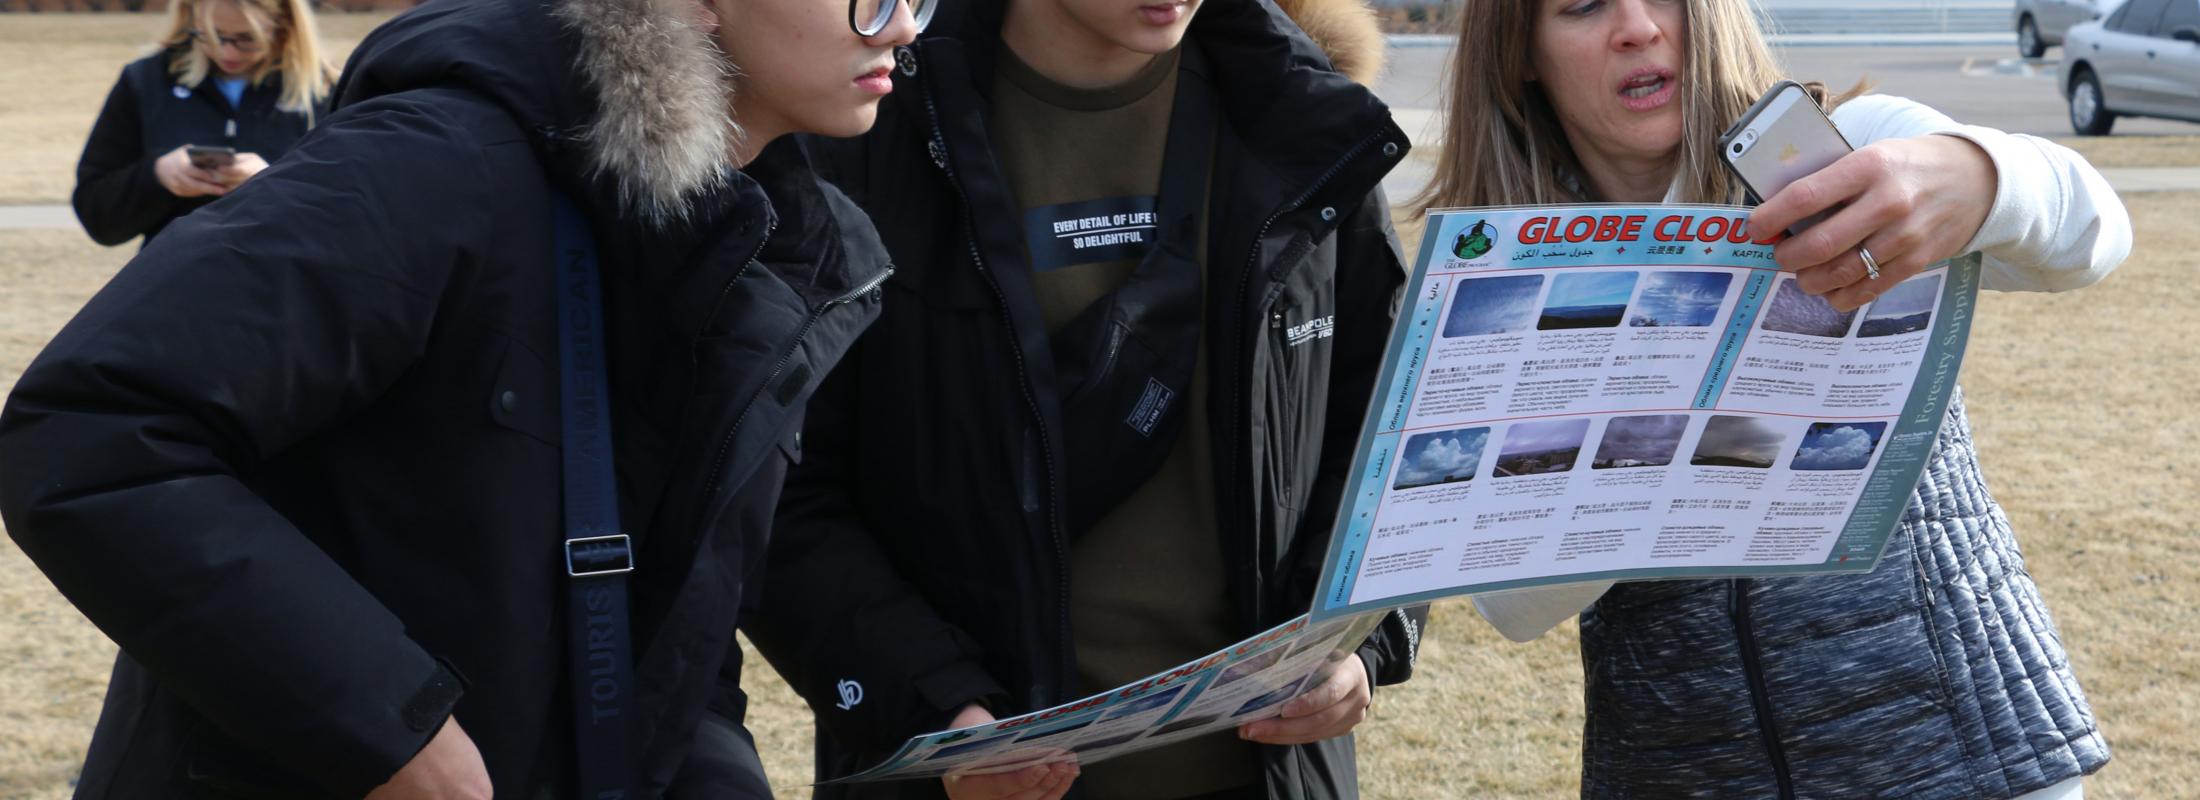 Chinese students look at chart held by an instructor outdoors